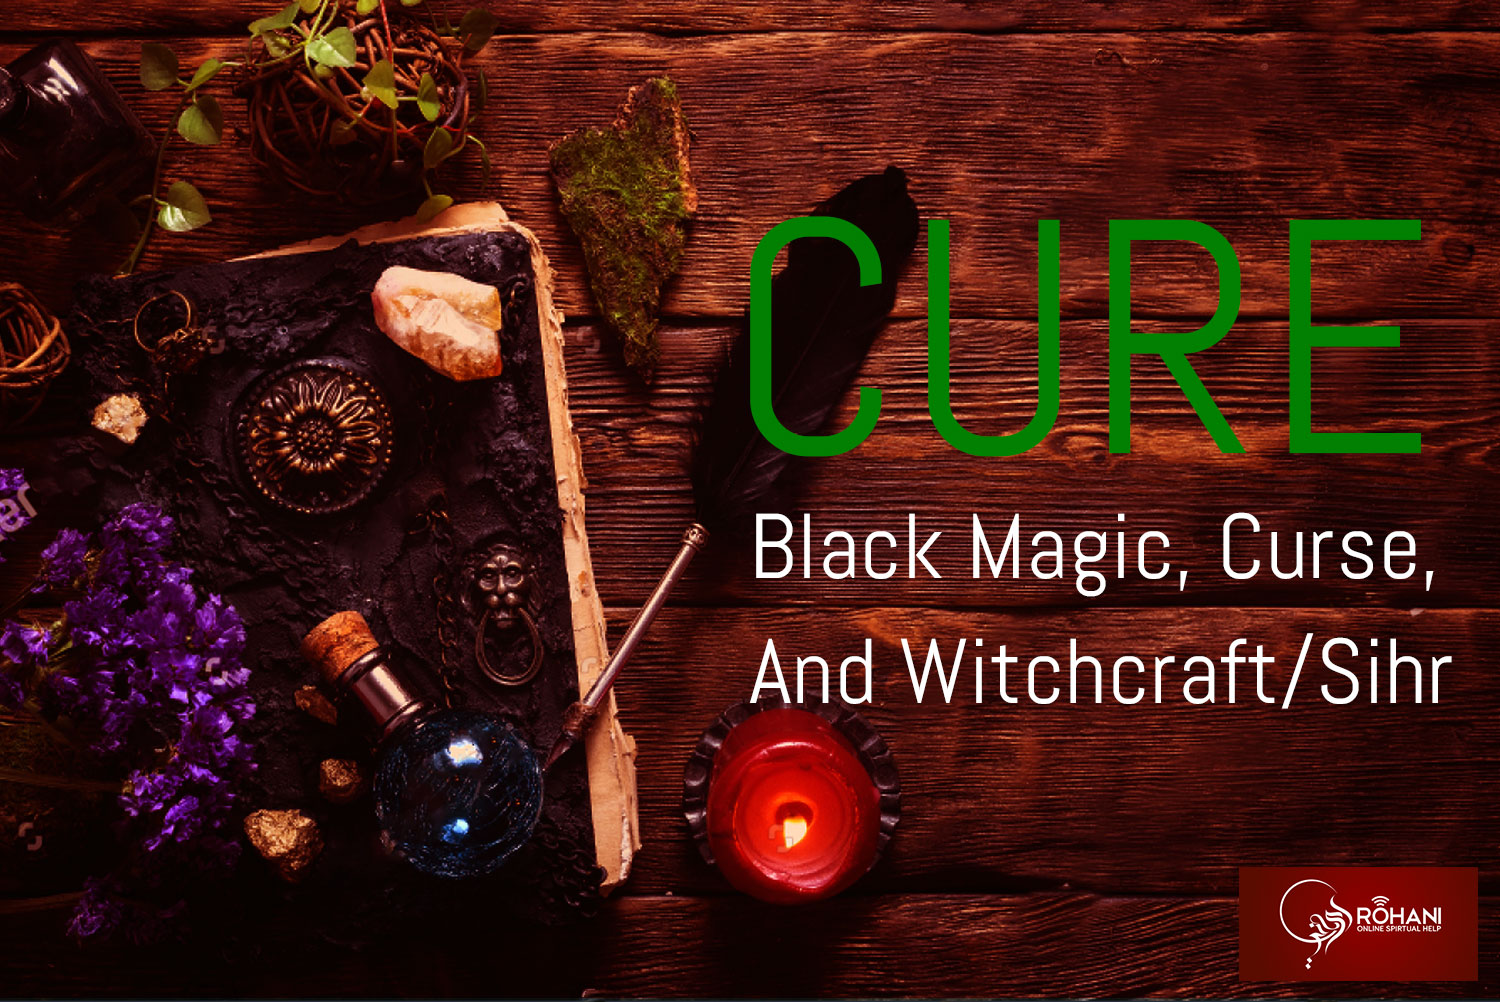 Curing-Black-Magic-Curse-And-Witchcraft